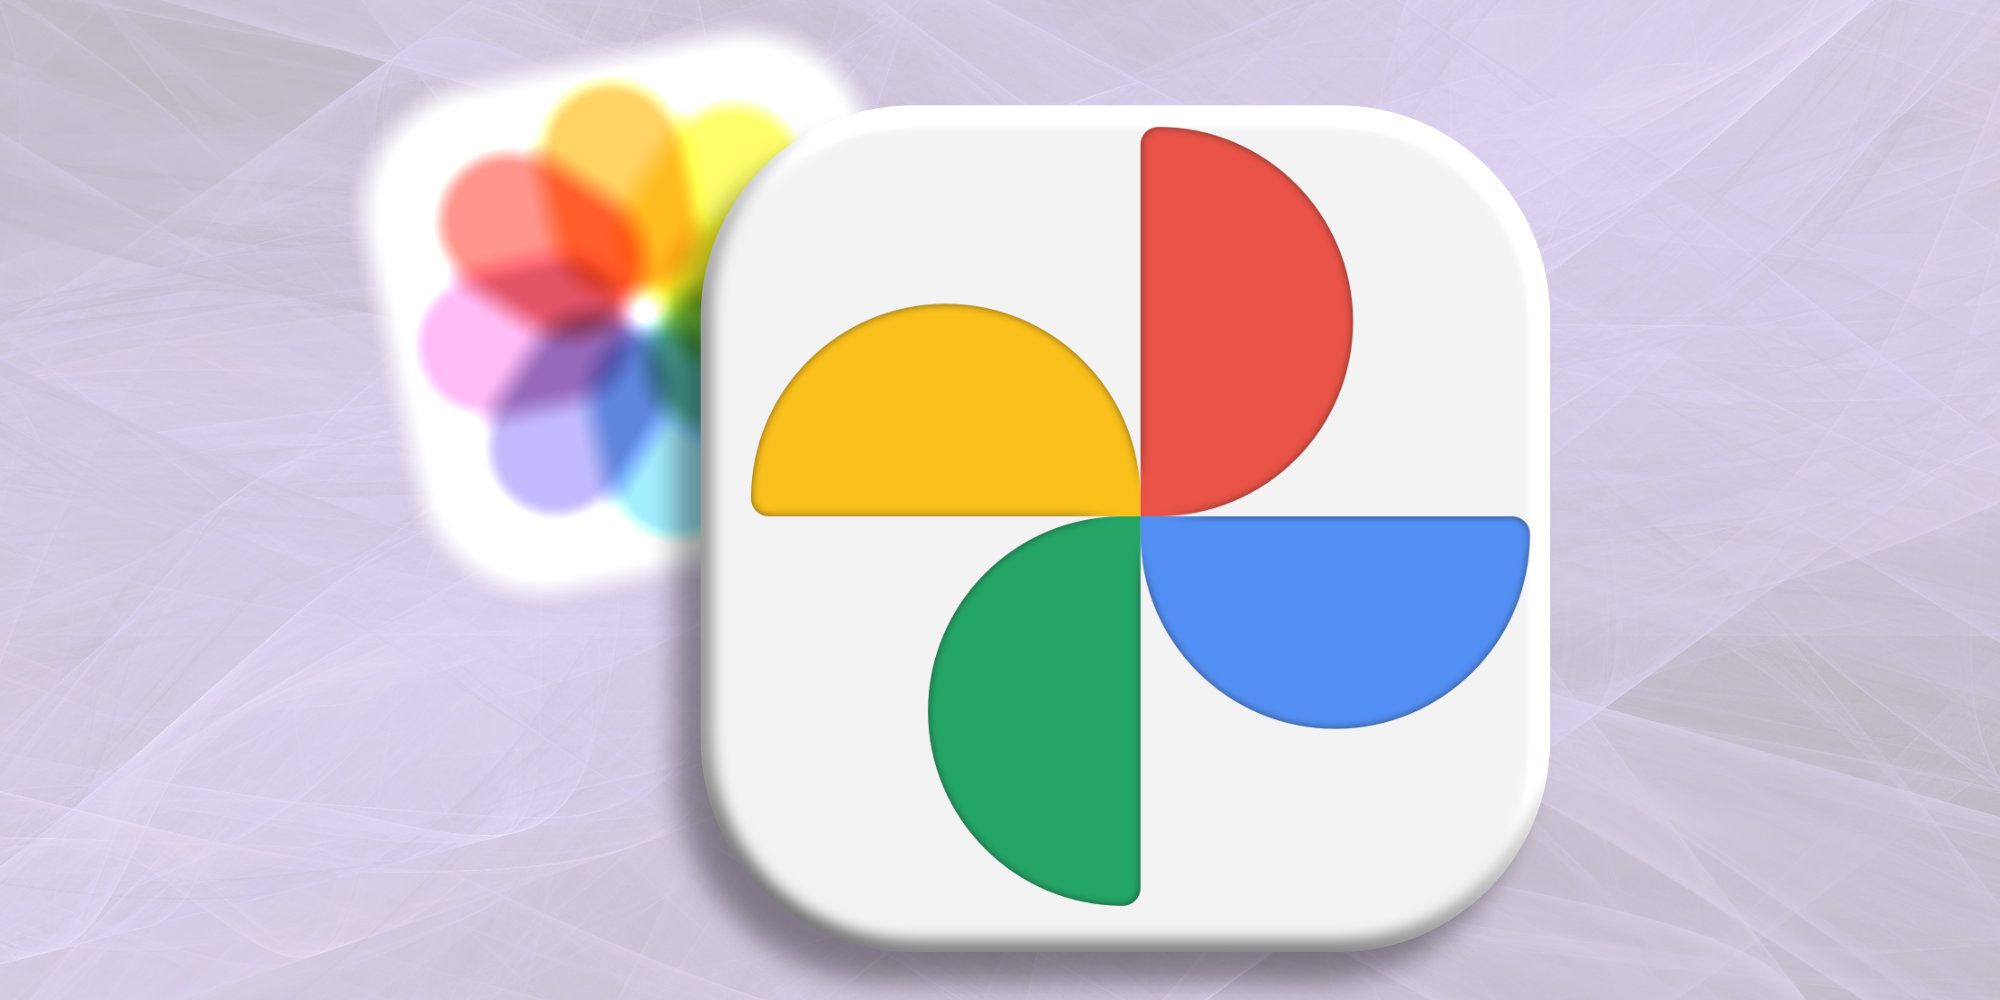 Google Photos On Android Gains New Editor: What You Need To Know